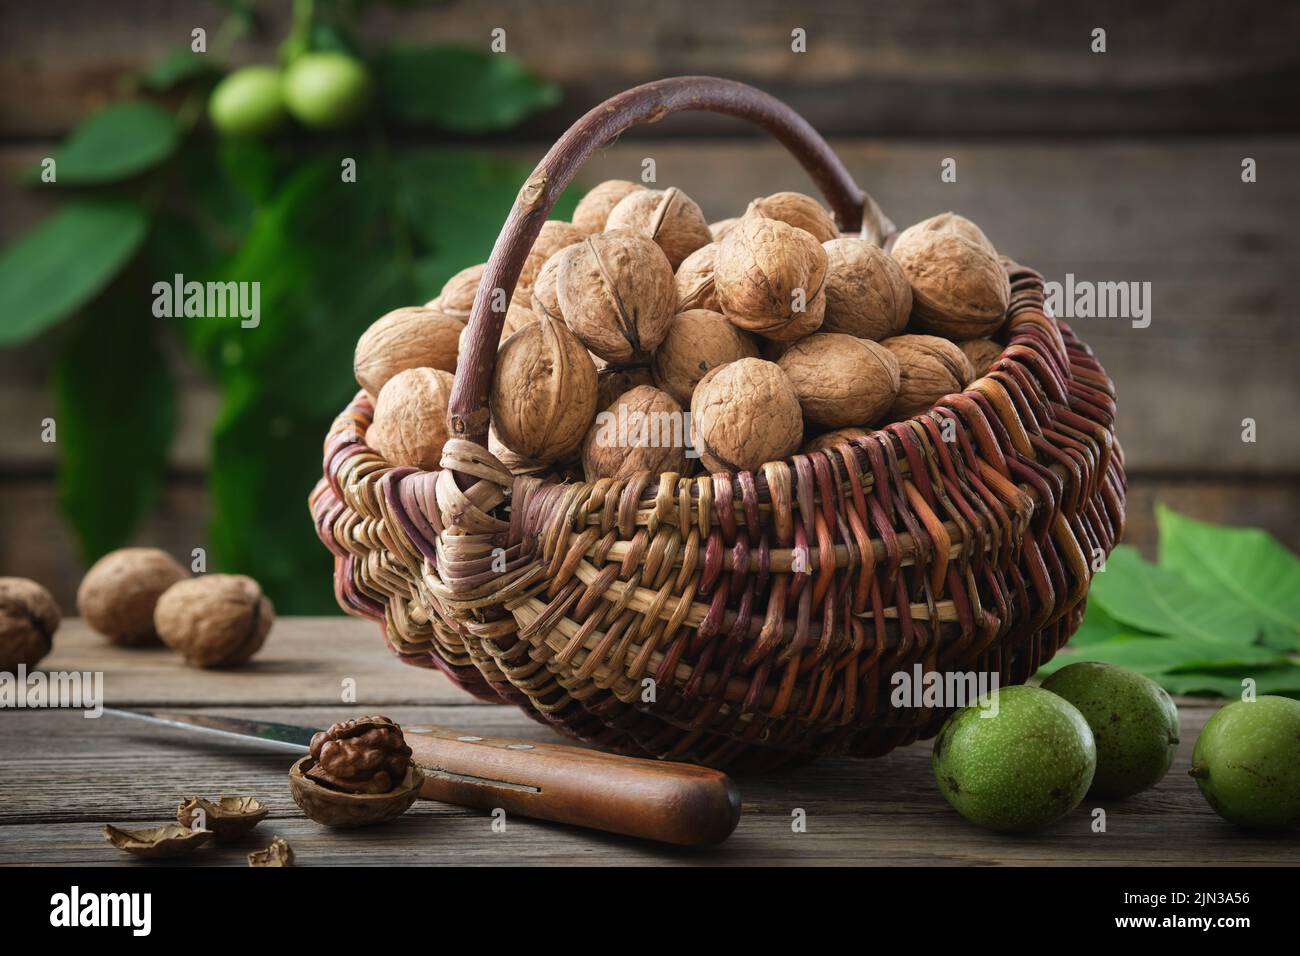 Wicker basket full of walnuts. green and ripe walnuts, knife on wooden table. Stock Photo